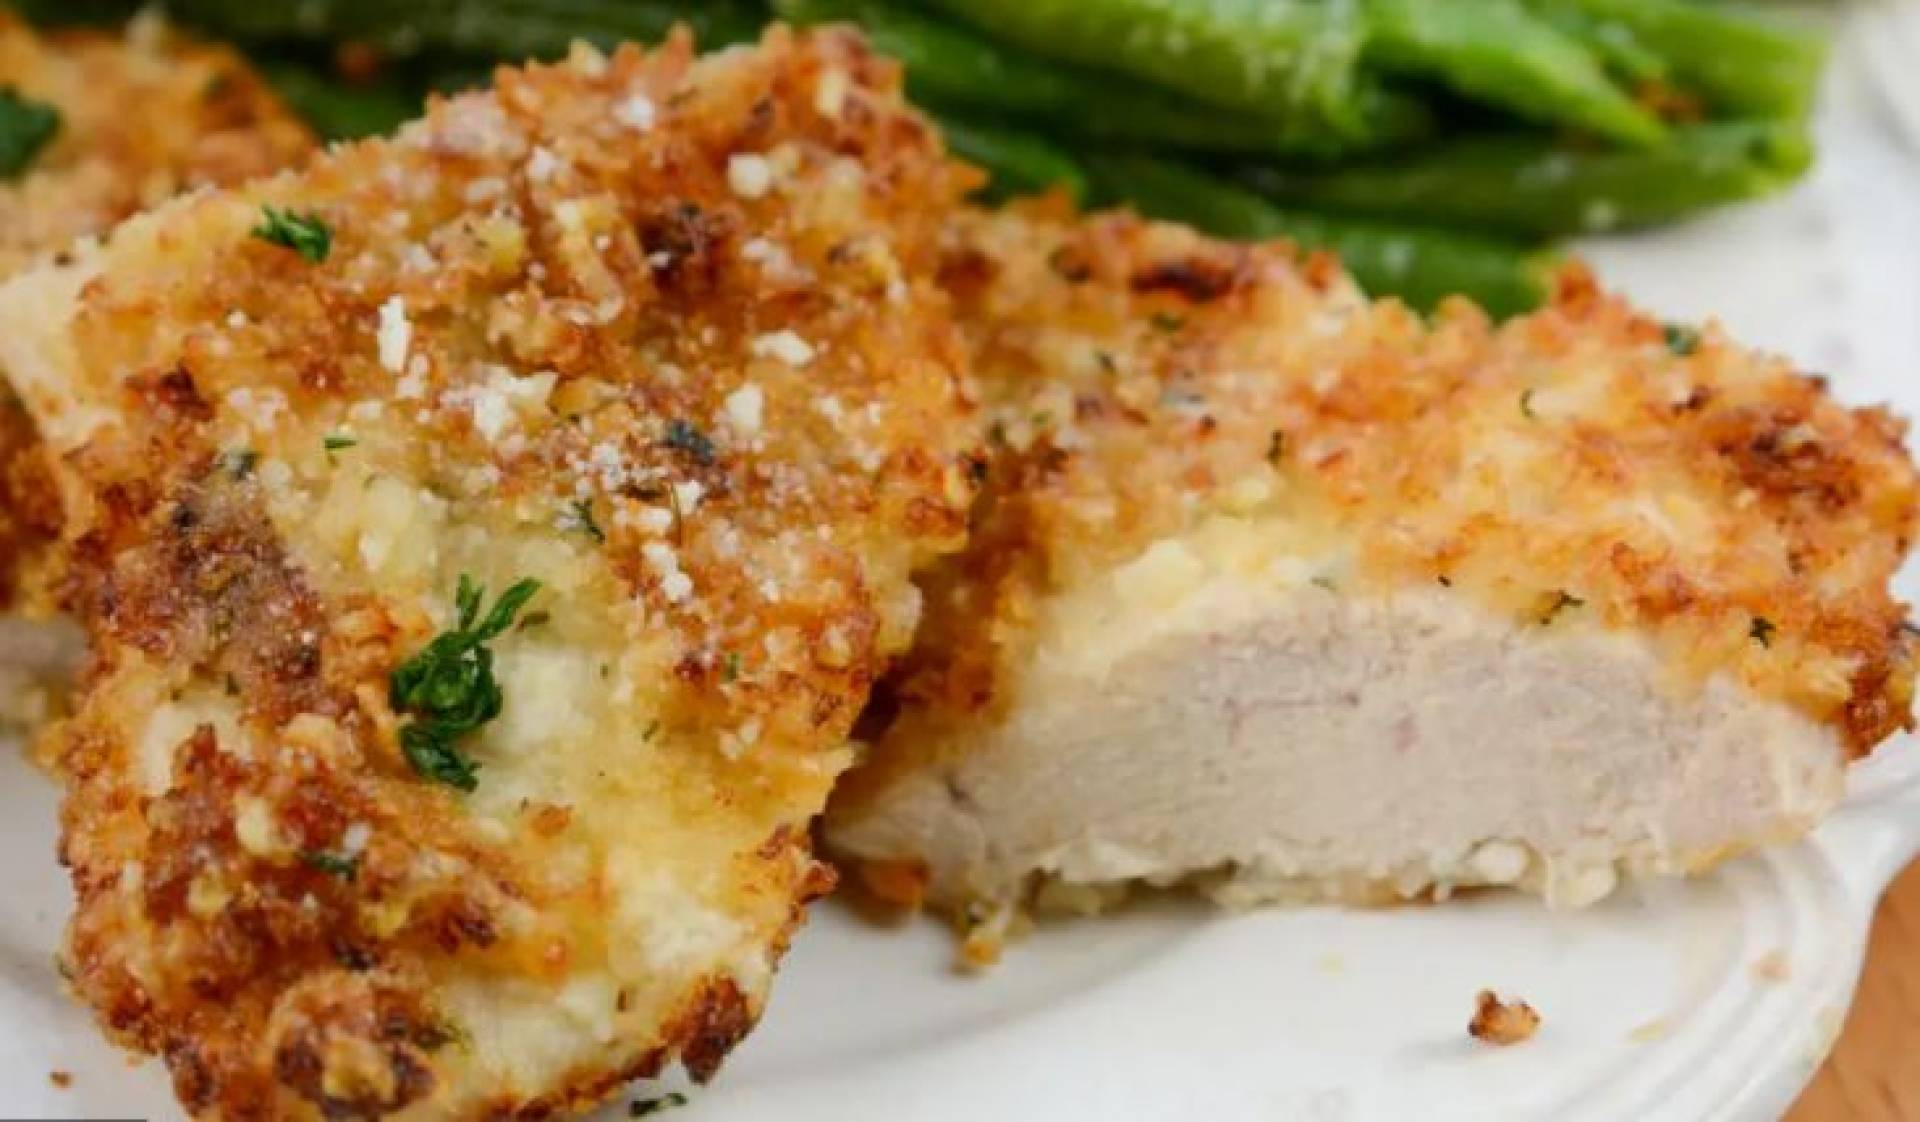 Parmesan Herb Crusted Chicken and Broccoli